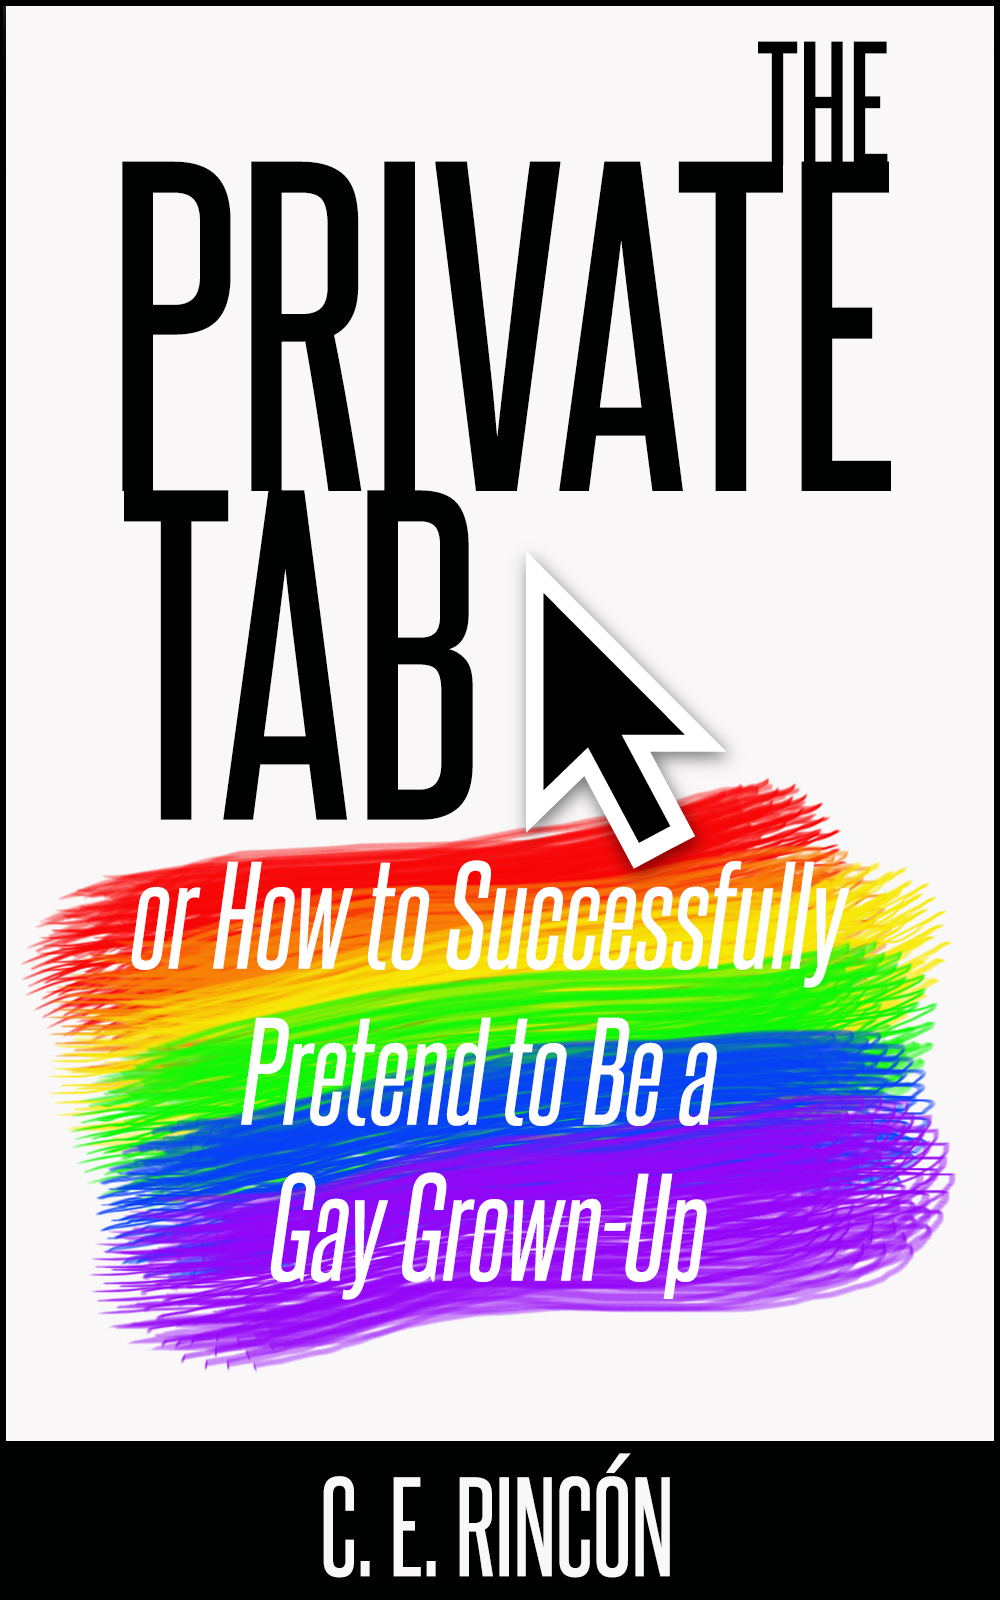 FREE: The Private Tab, or How to Successfully Pretend to Be a Gay Grown-Up by C. E. Rincón